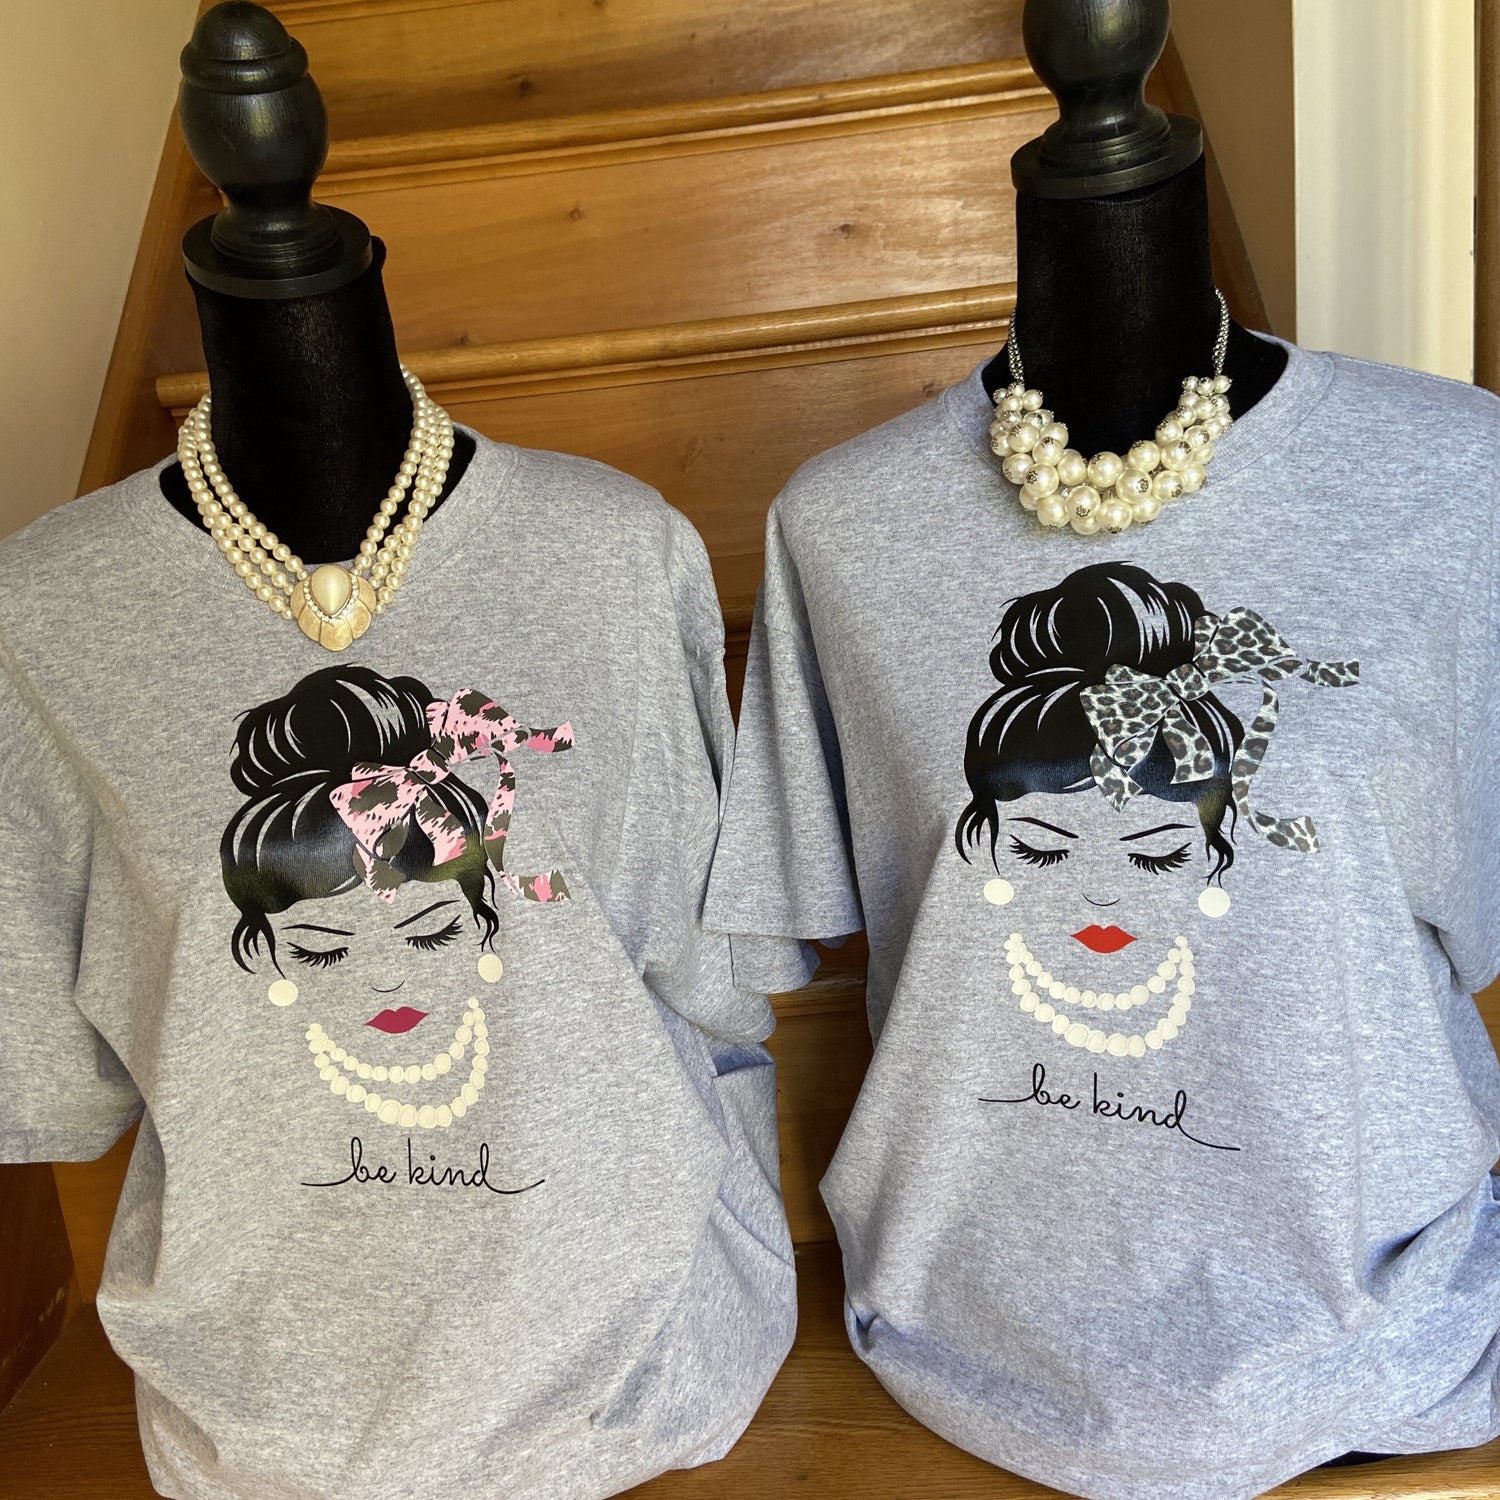 Two Woman with a bun and bow on a gray t-shirt, “Be Kind”.